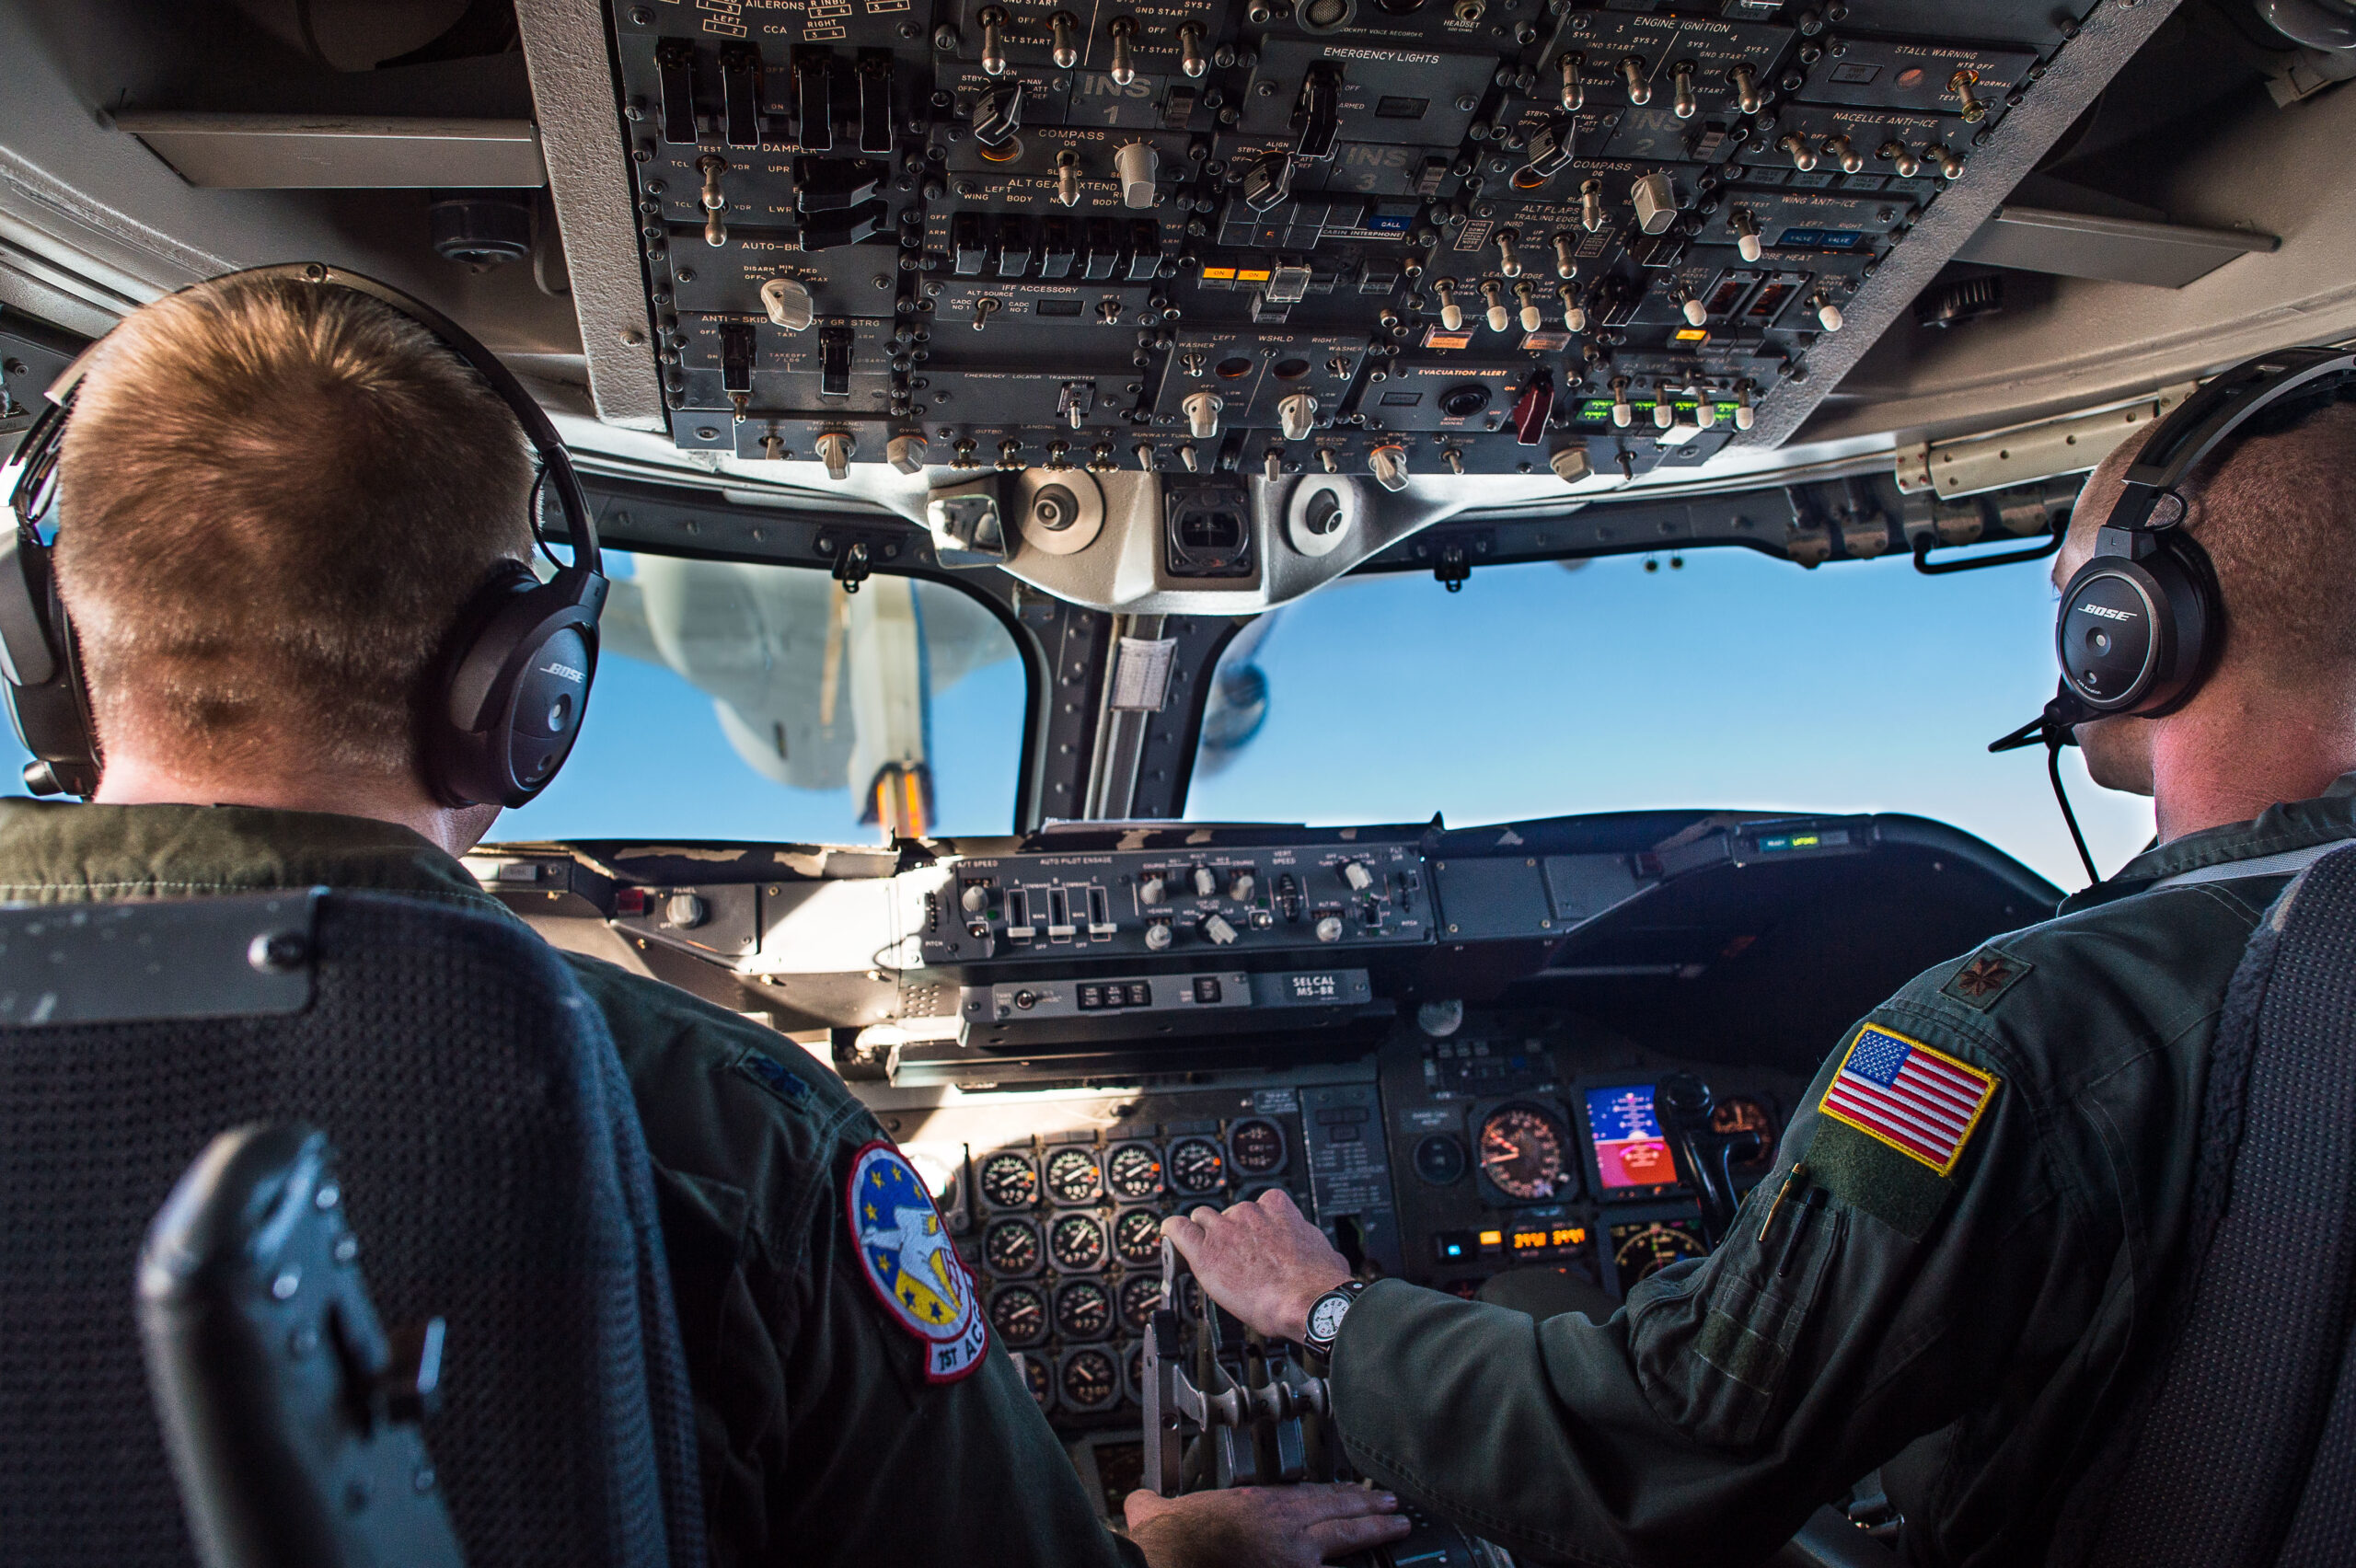 The view from the flight deck of an E-4B carrying while carrying out aerial refueling en route to South Korea, in February 2017. The aircraft was carrying the then Defense Secretary Jim Mattis. <em>U.S. Department of Defense photo by Army Sgt. Amber I. Smith</em>